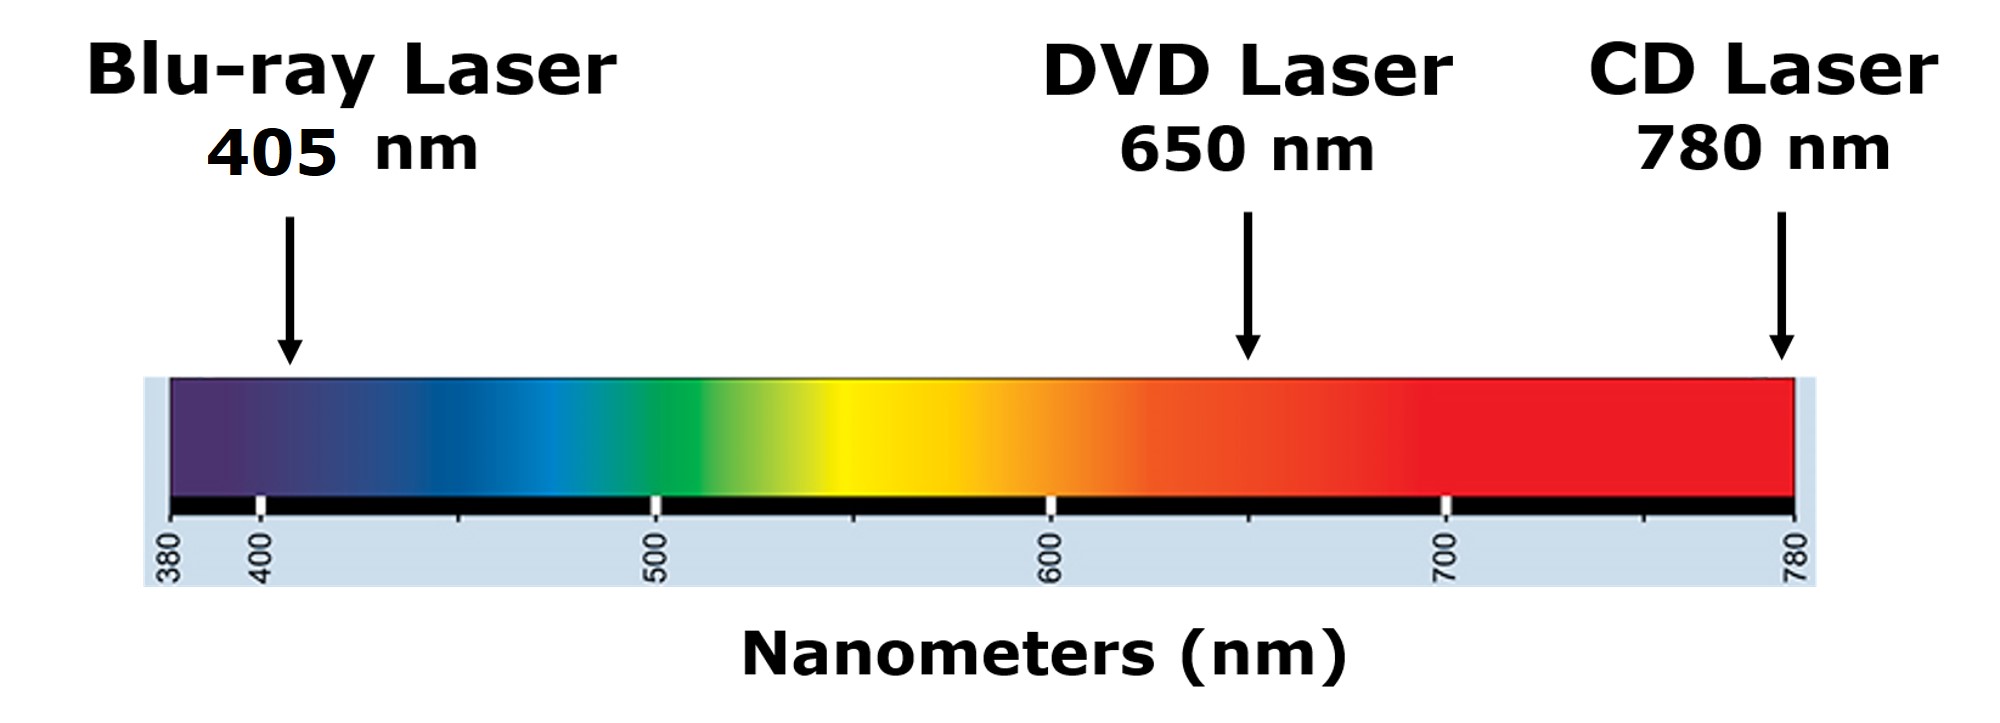 The laser wavelength for reading a CD at 780 nm and in the far red of the light spectrum, a DVD at 650 nm and in the near red, and a Blu-ray disc at 405 nm and in the blue/violet wavelength region.